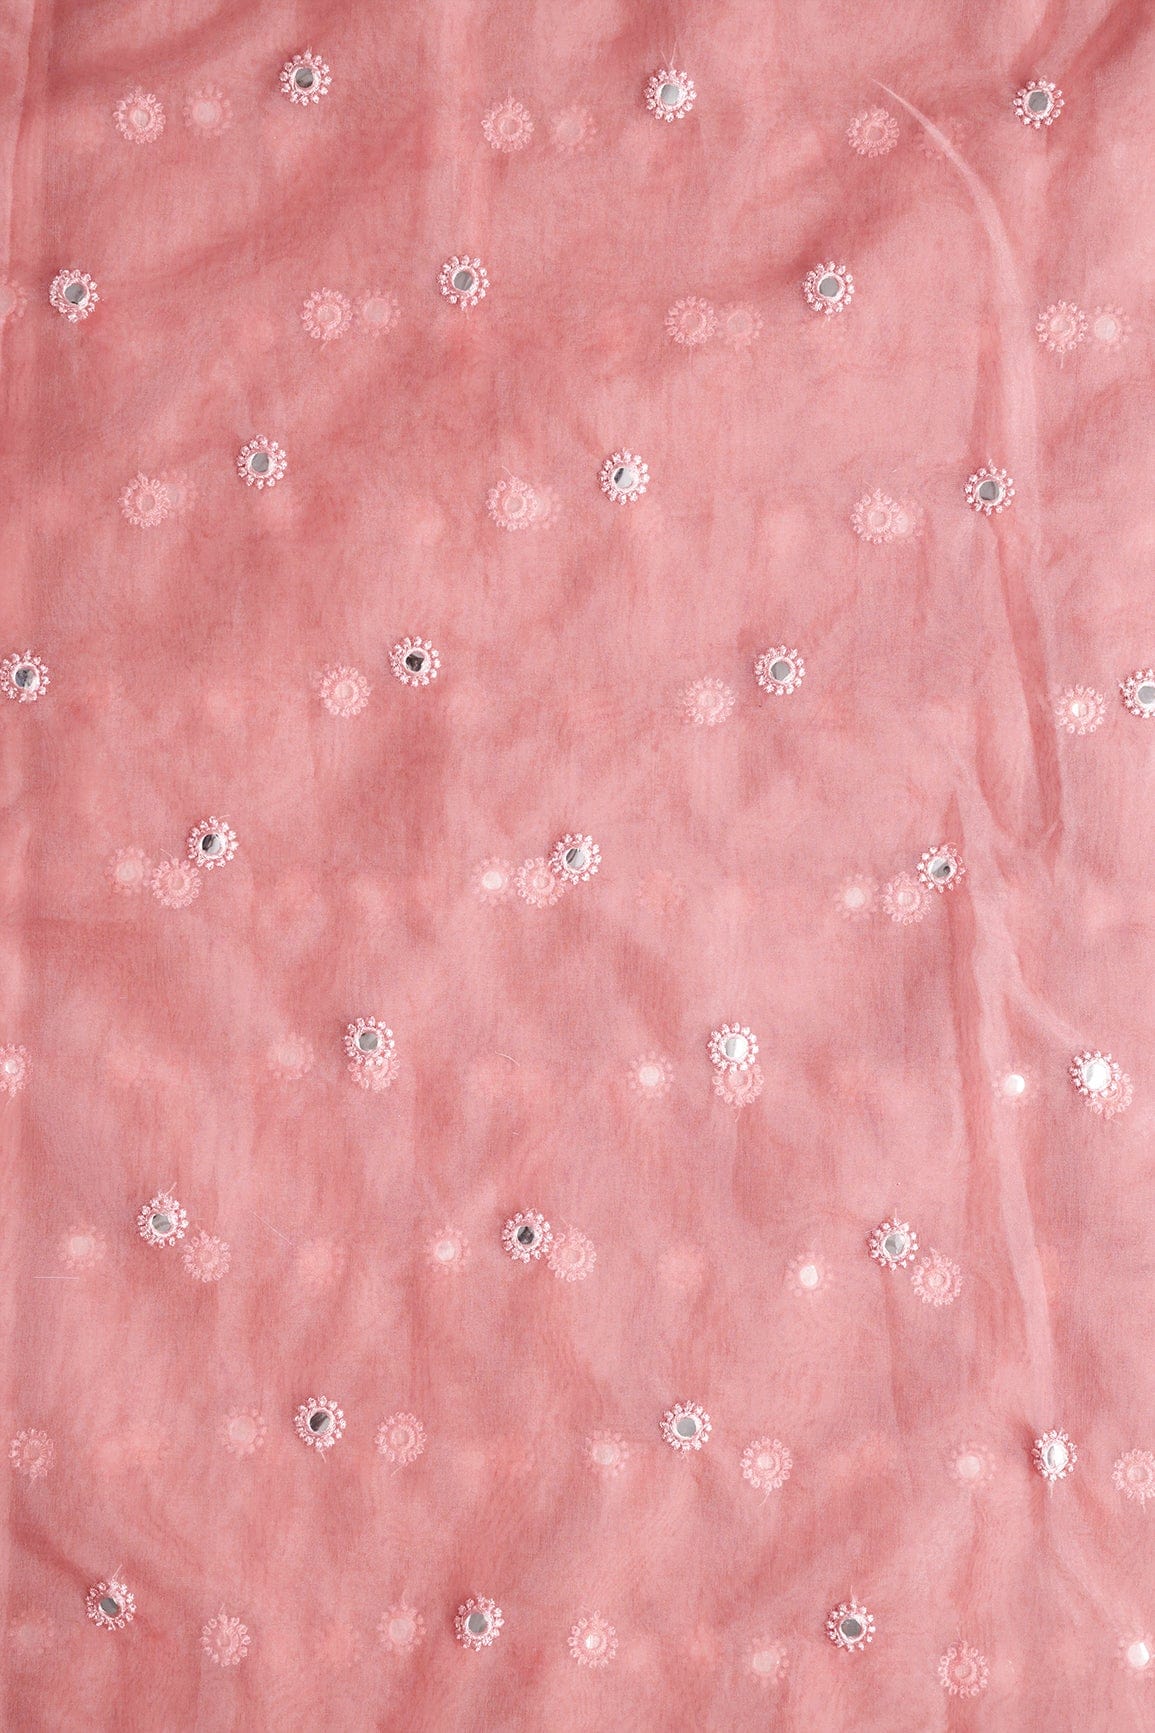 doeraa Embroidery Fabrics Pink Thread With Foil Mirror Work Small Motif Embroidery On Coral Pink Organza Fabric